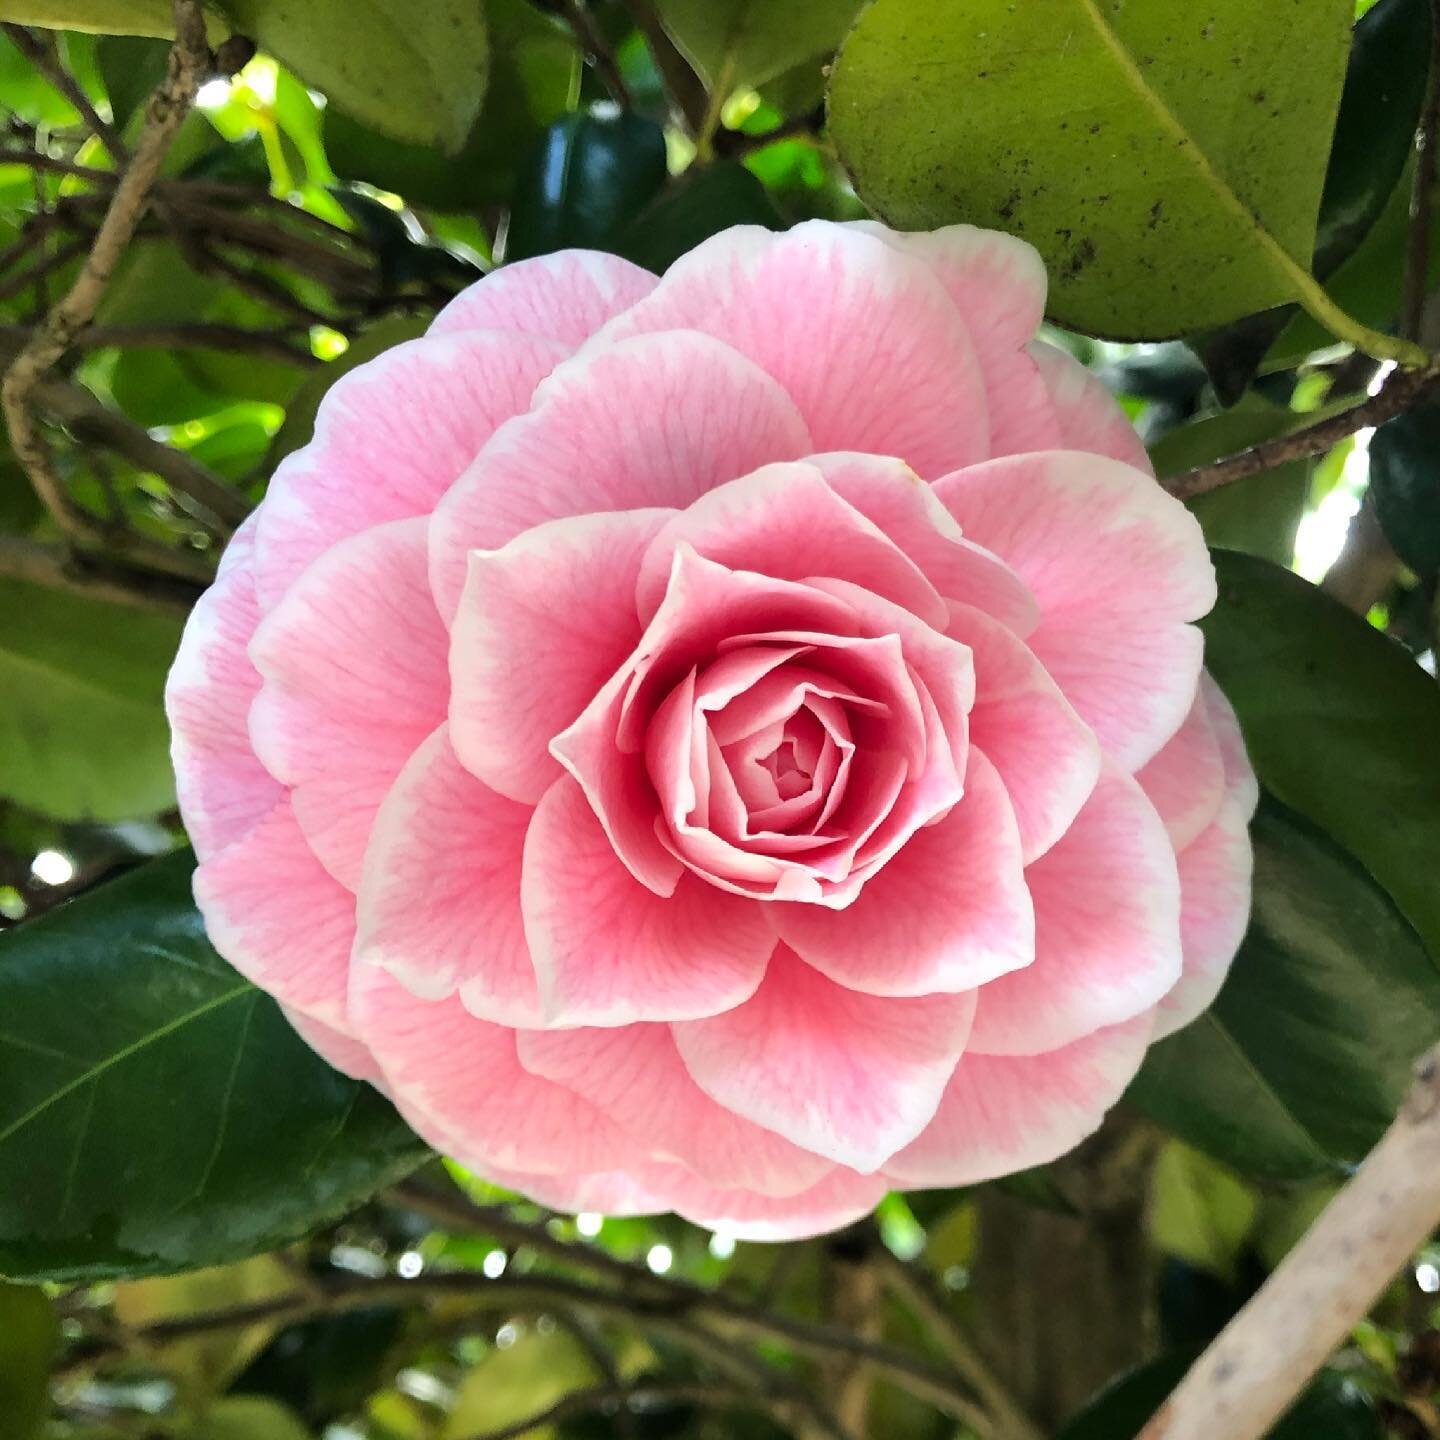 There is something exquisite about the first camellia flower on this tree. Each one is so perfect and mesmerising with its symmetry and colours. After the yellow that first creeps into the garden first after the winter, this camellia bursts into pink